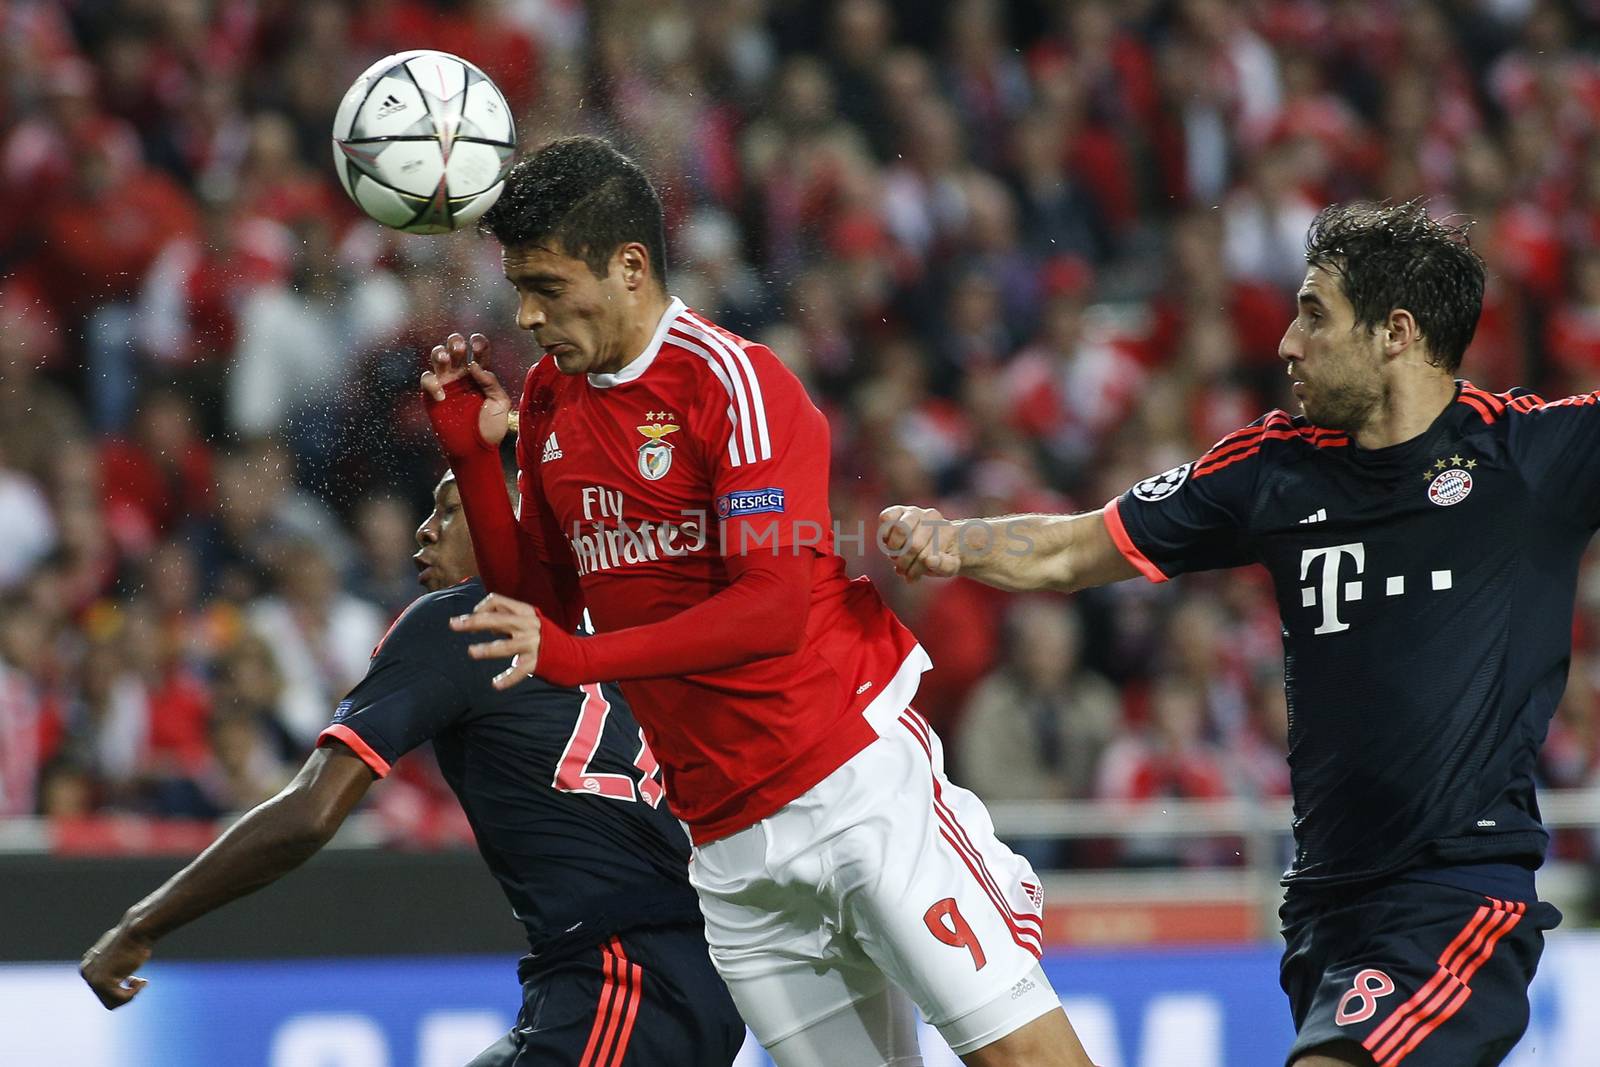 PORTUGAL, Lisbon: Football player Raúl Jiménez of Benfica scores the opening goal during the UEFA Champions League Quarter Final Second Leg match between SL Benfica and FC Bayern Munchen at Estadio da Luz on April 13, 2016 in Lisbon, Portugal. Bayern Munich reached the Champions League semi-finals for the fifth consecutive season. 